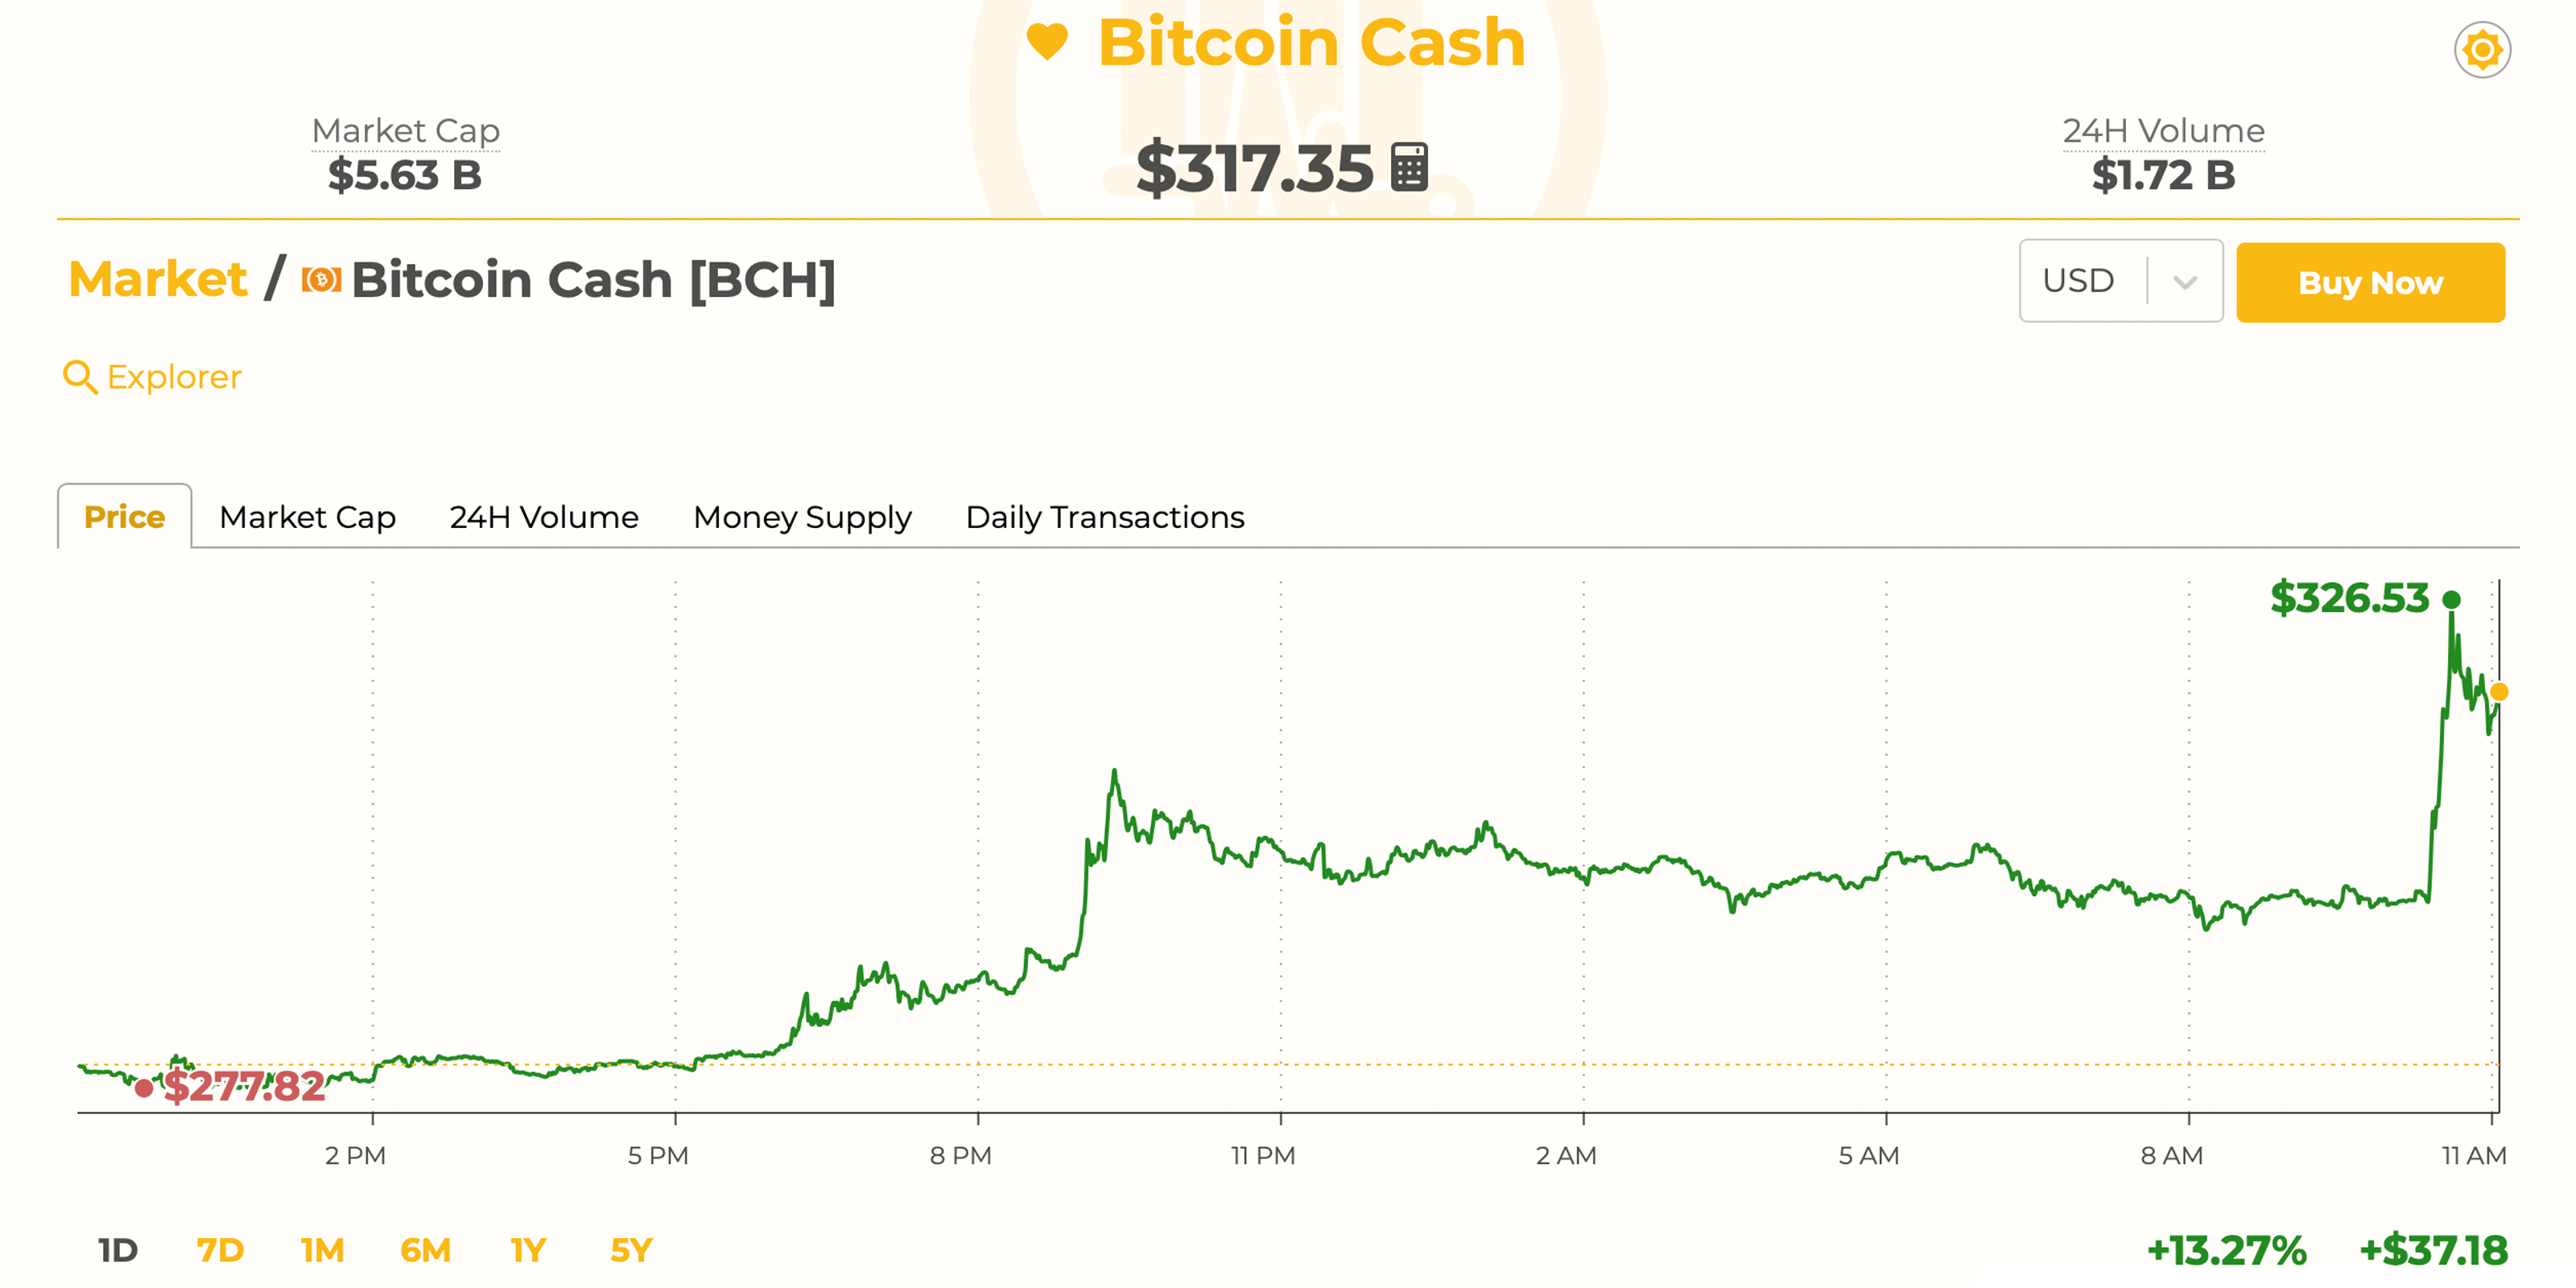 Markets Update: Bitcoin Cash Leads the Pack Again as Price Sees Double Digit Gains